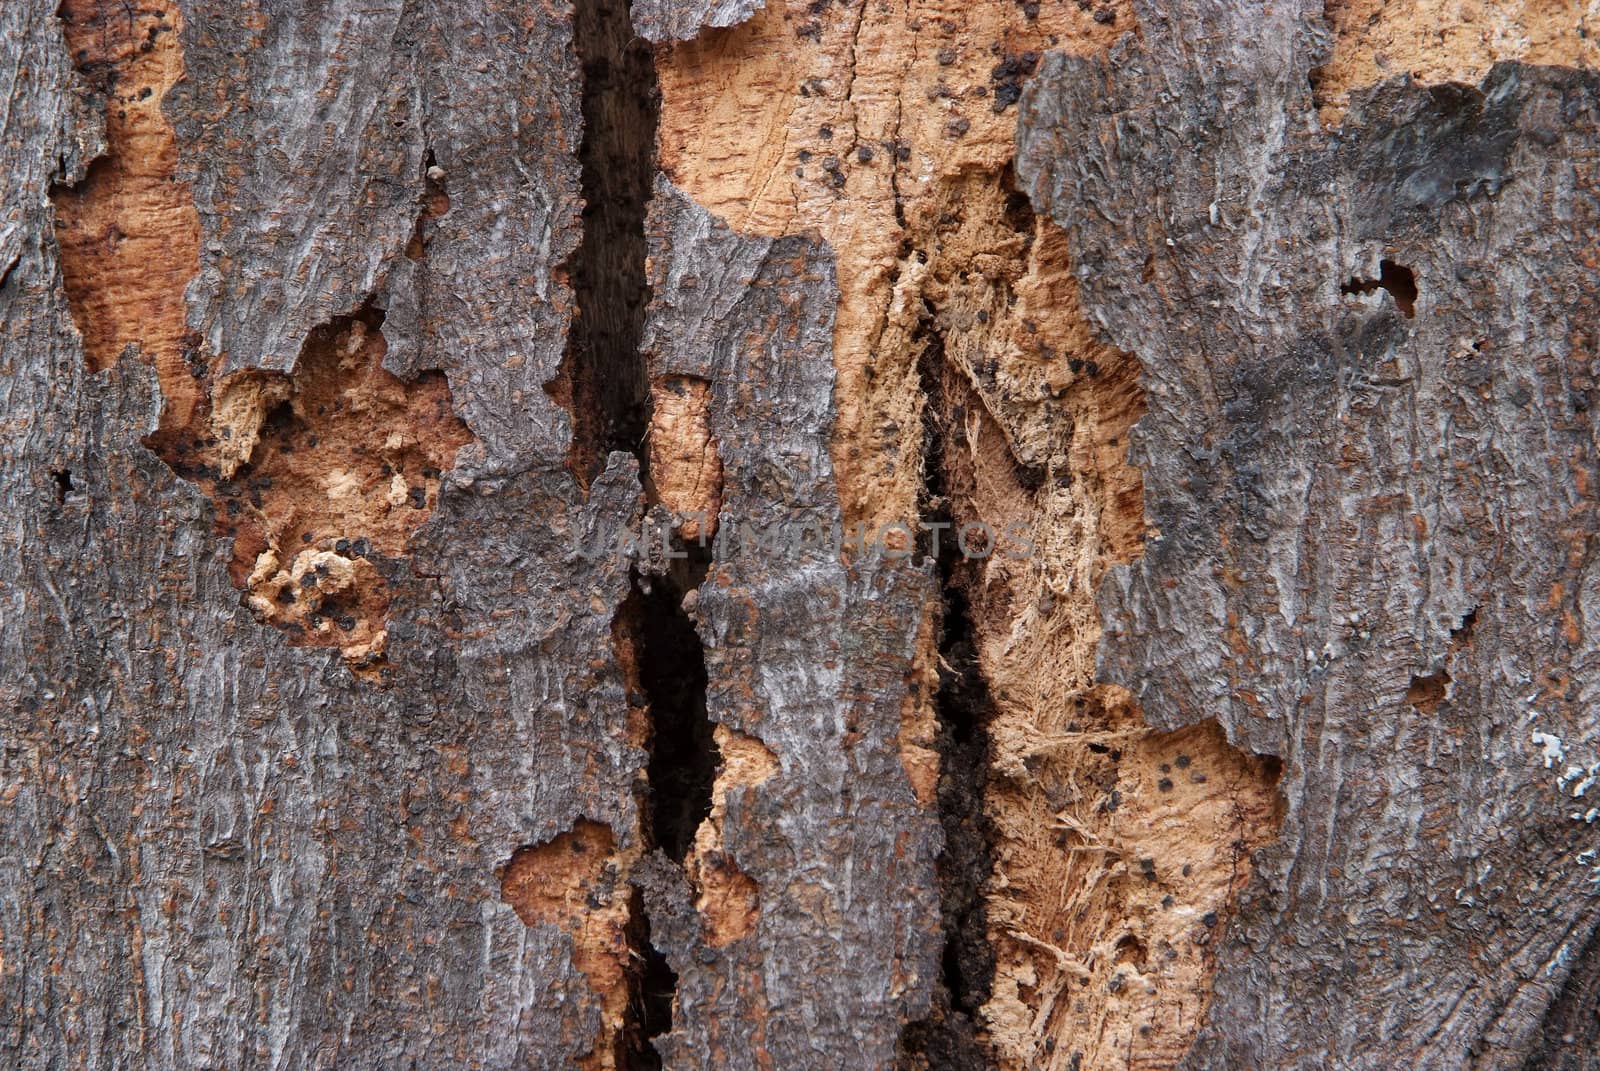 Close-up of fracture on the bark.